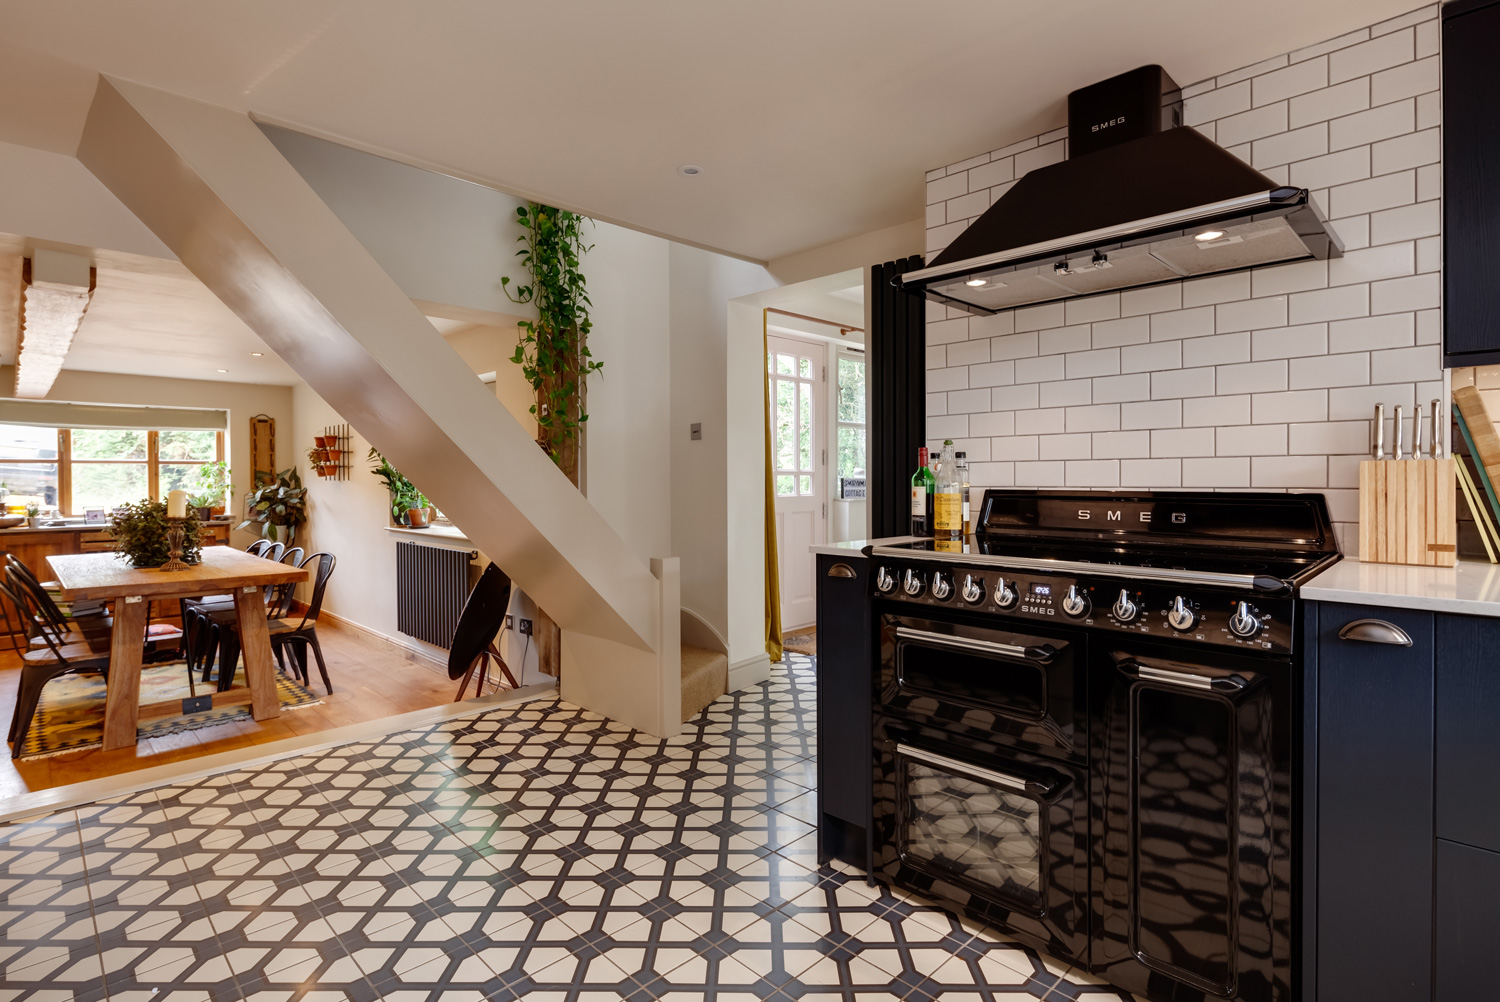 Cottage kitchen with distinctive traditional tile floor and striking dark coloured cabinetry with a range cooker, extractor hood and dining room in view